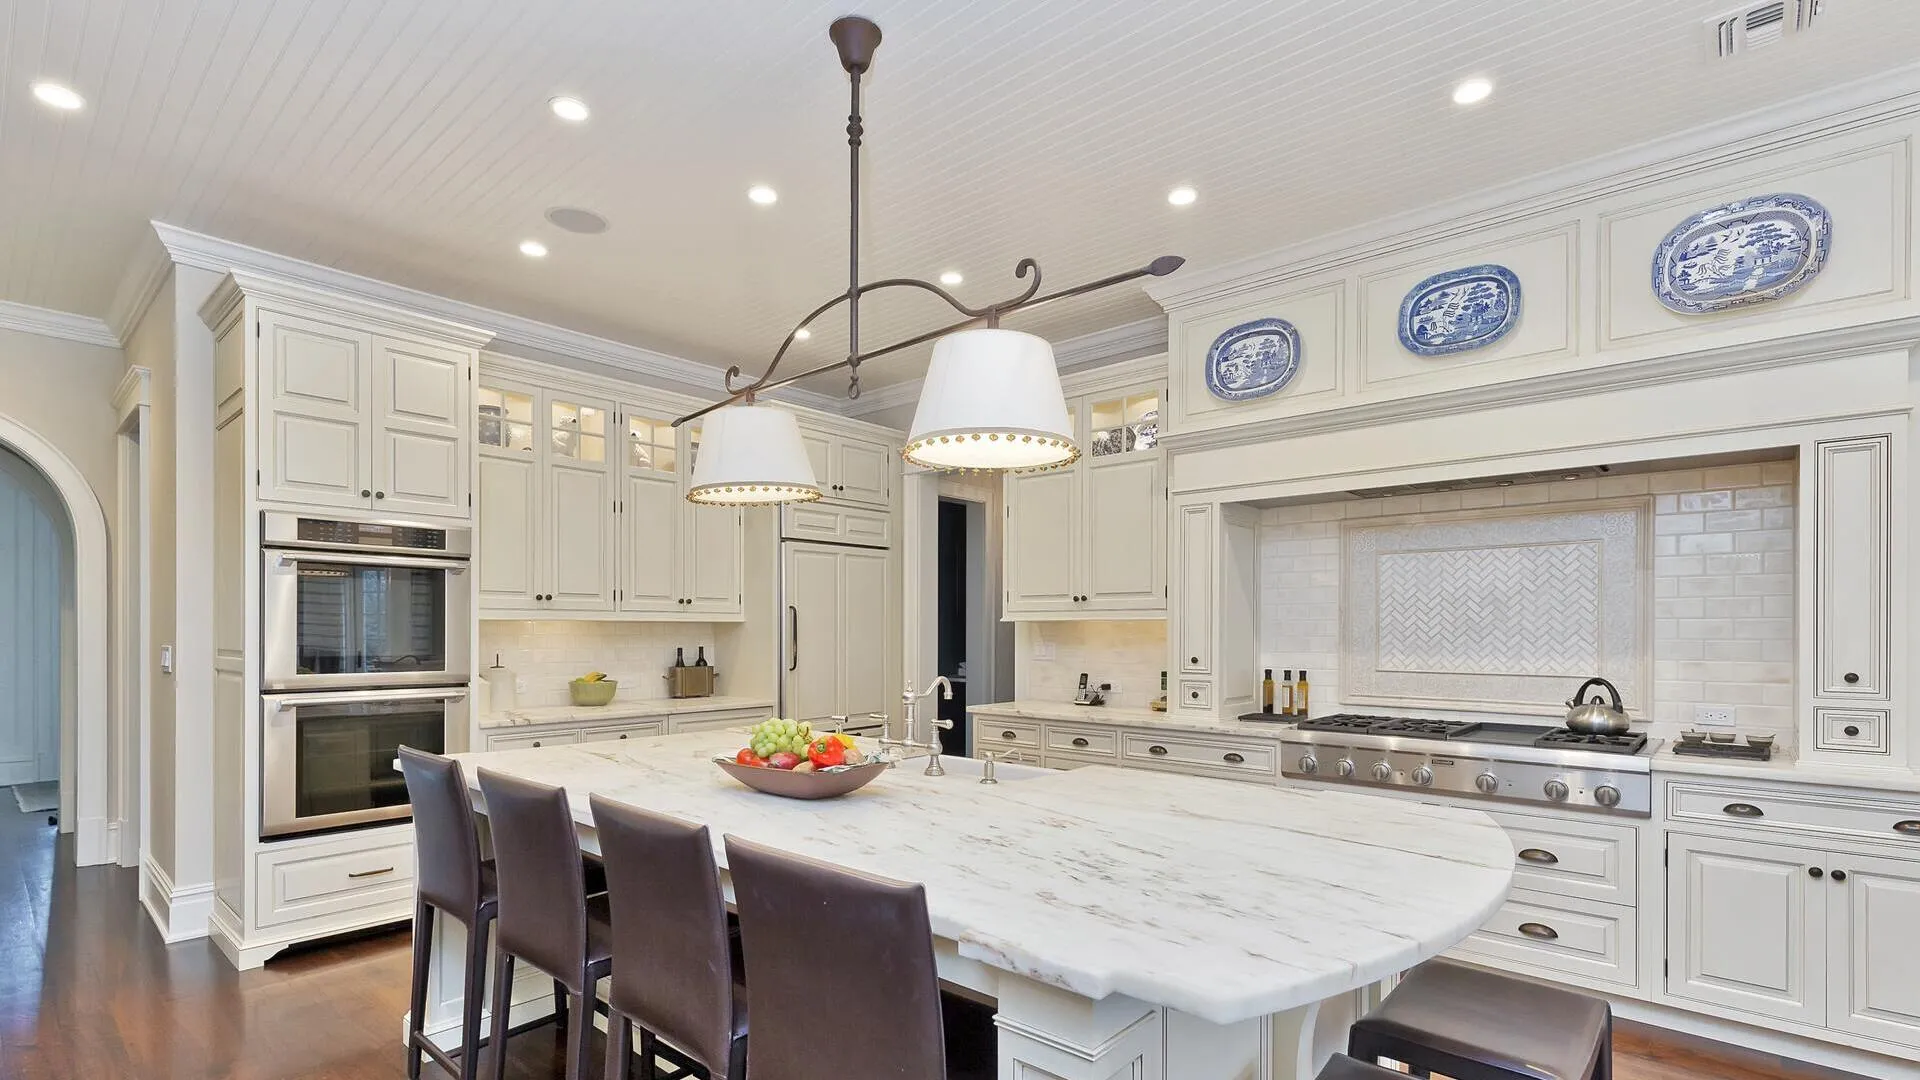 Grand kitchen with luxurious marble countertops.